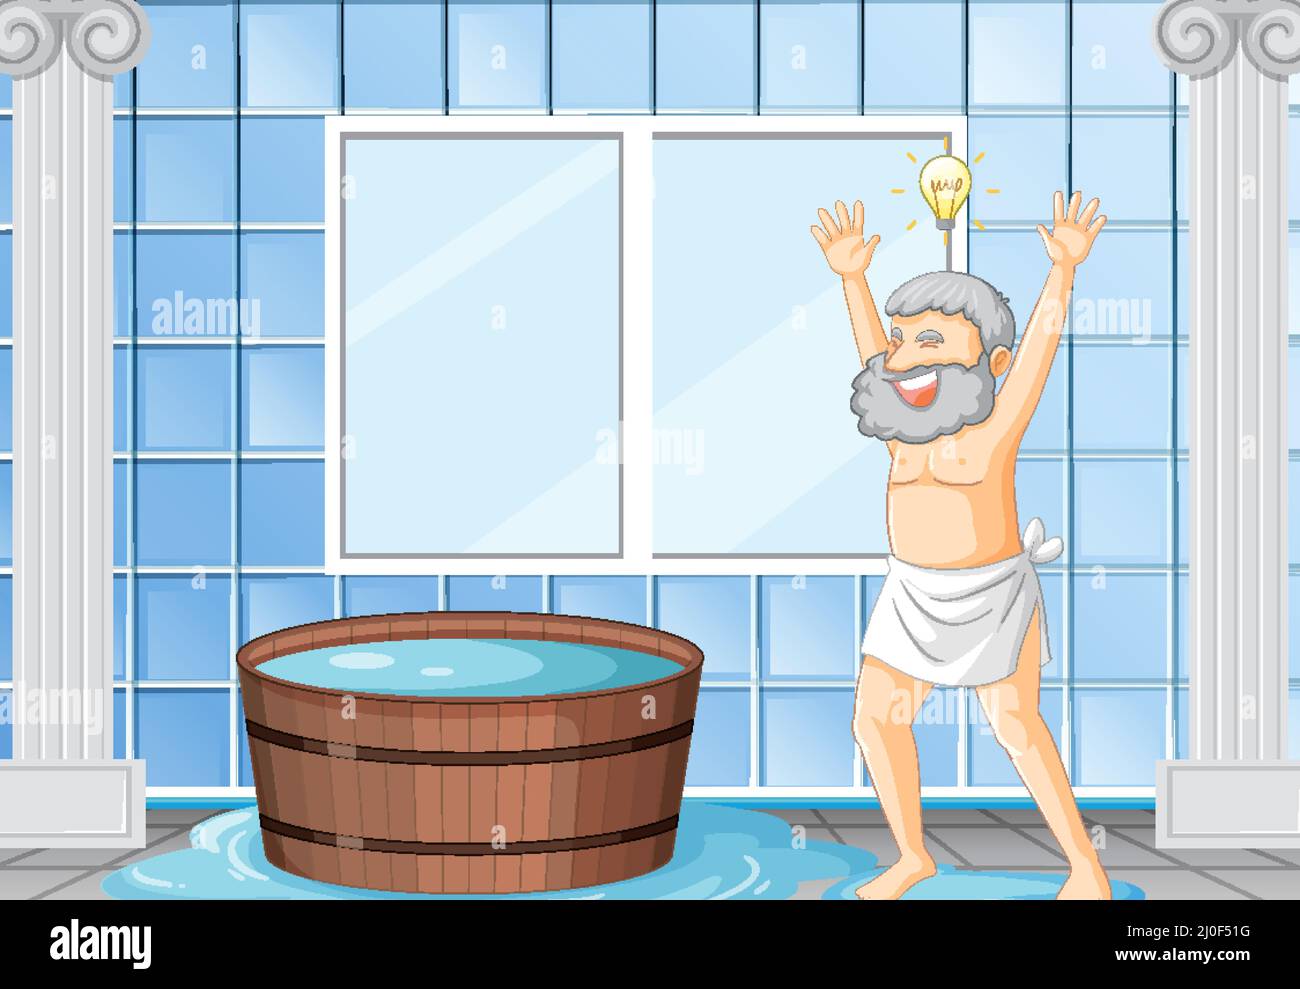 Happy Archimedes with bathtub illustration Stock Vector